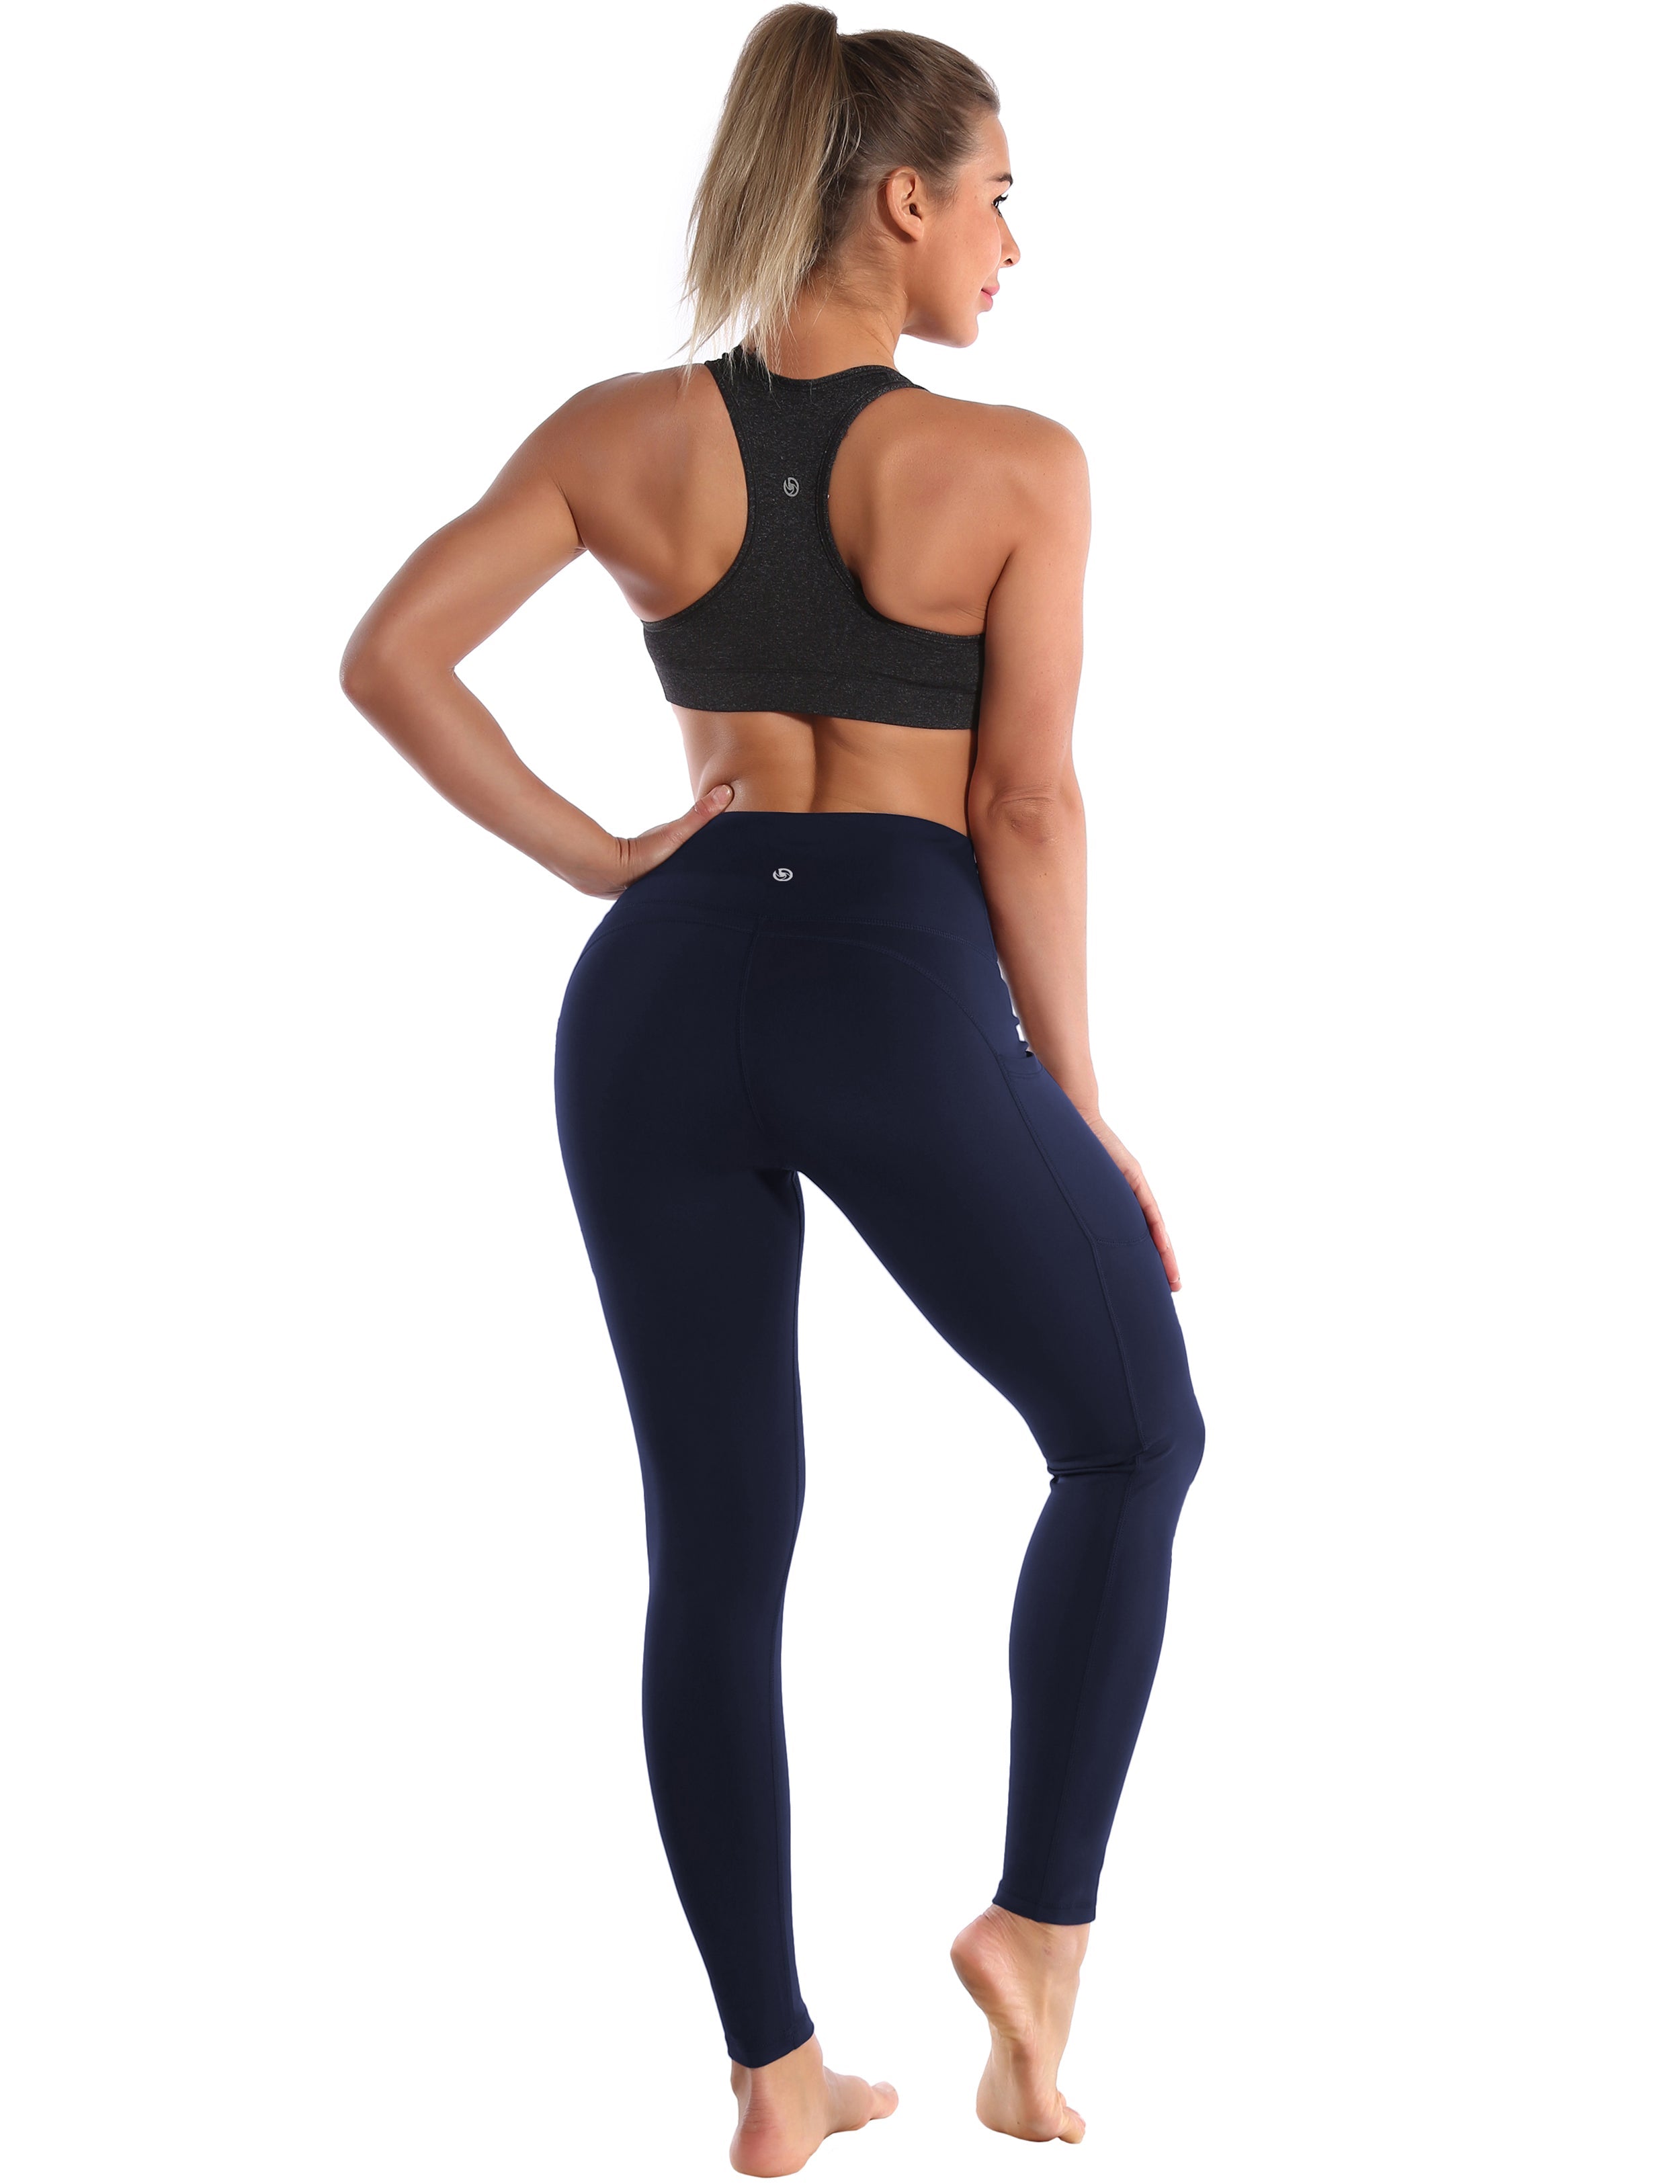 Hip Line Side Pockets Pilates Pants darknavy Sexy Hip Line Side Pockets 75%Nylon/25%Spandex Fabric doesn't attract lint easily 4-way stretch No see-through Moisture-wicking Tummy control Inner pocket Two lengths